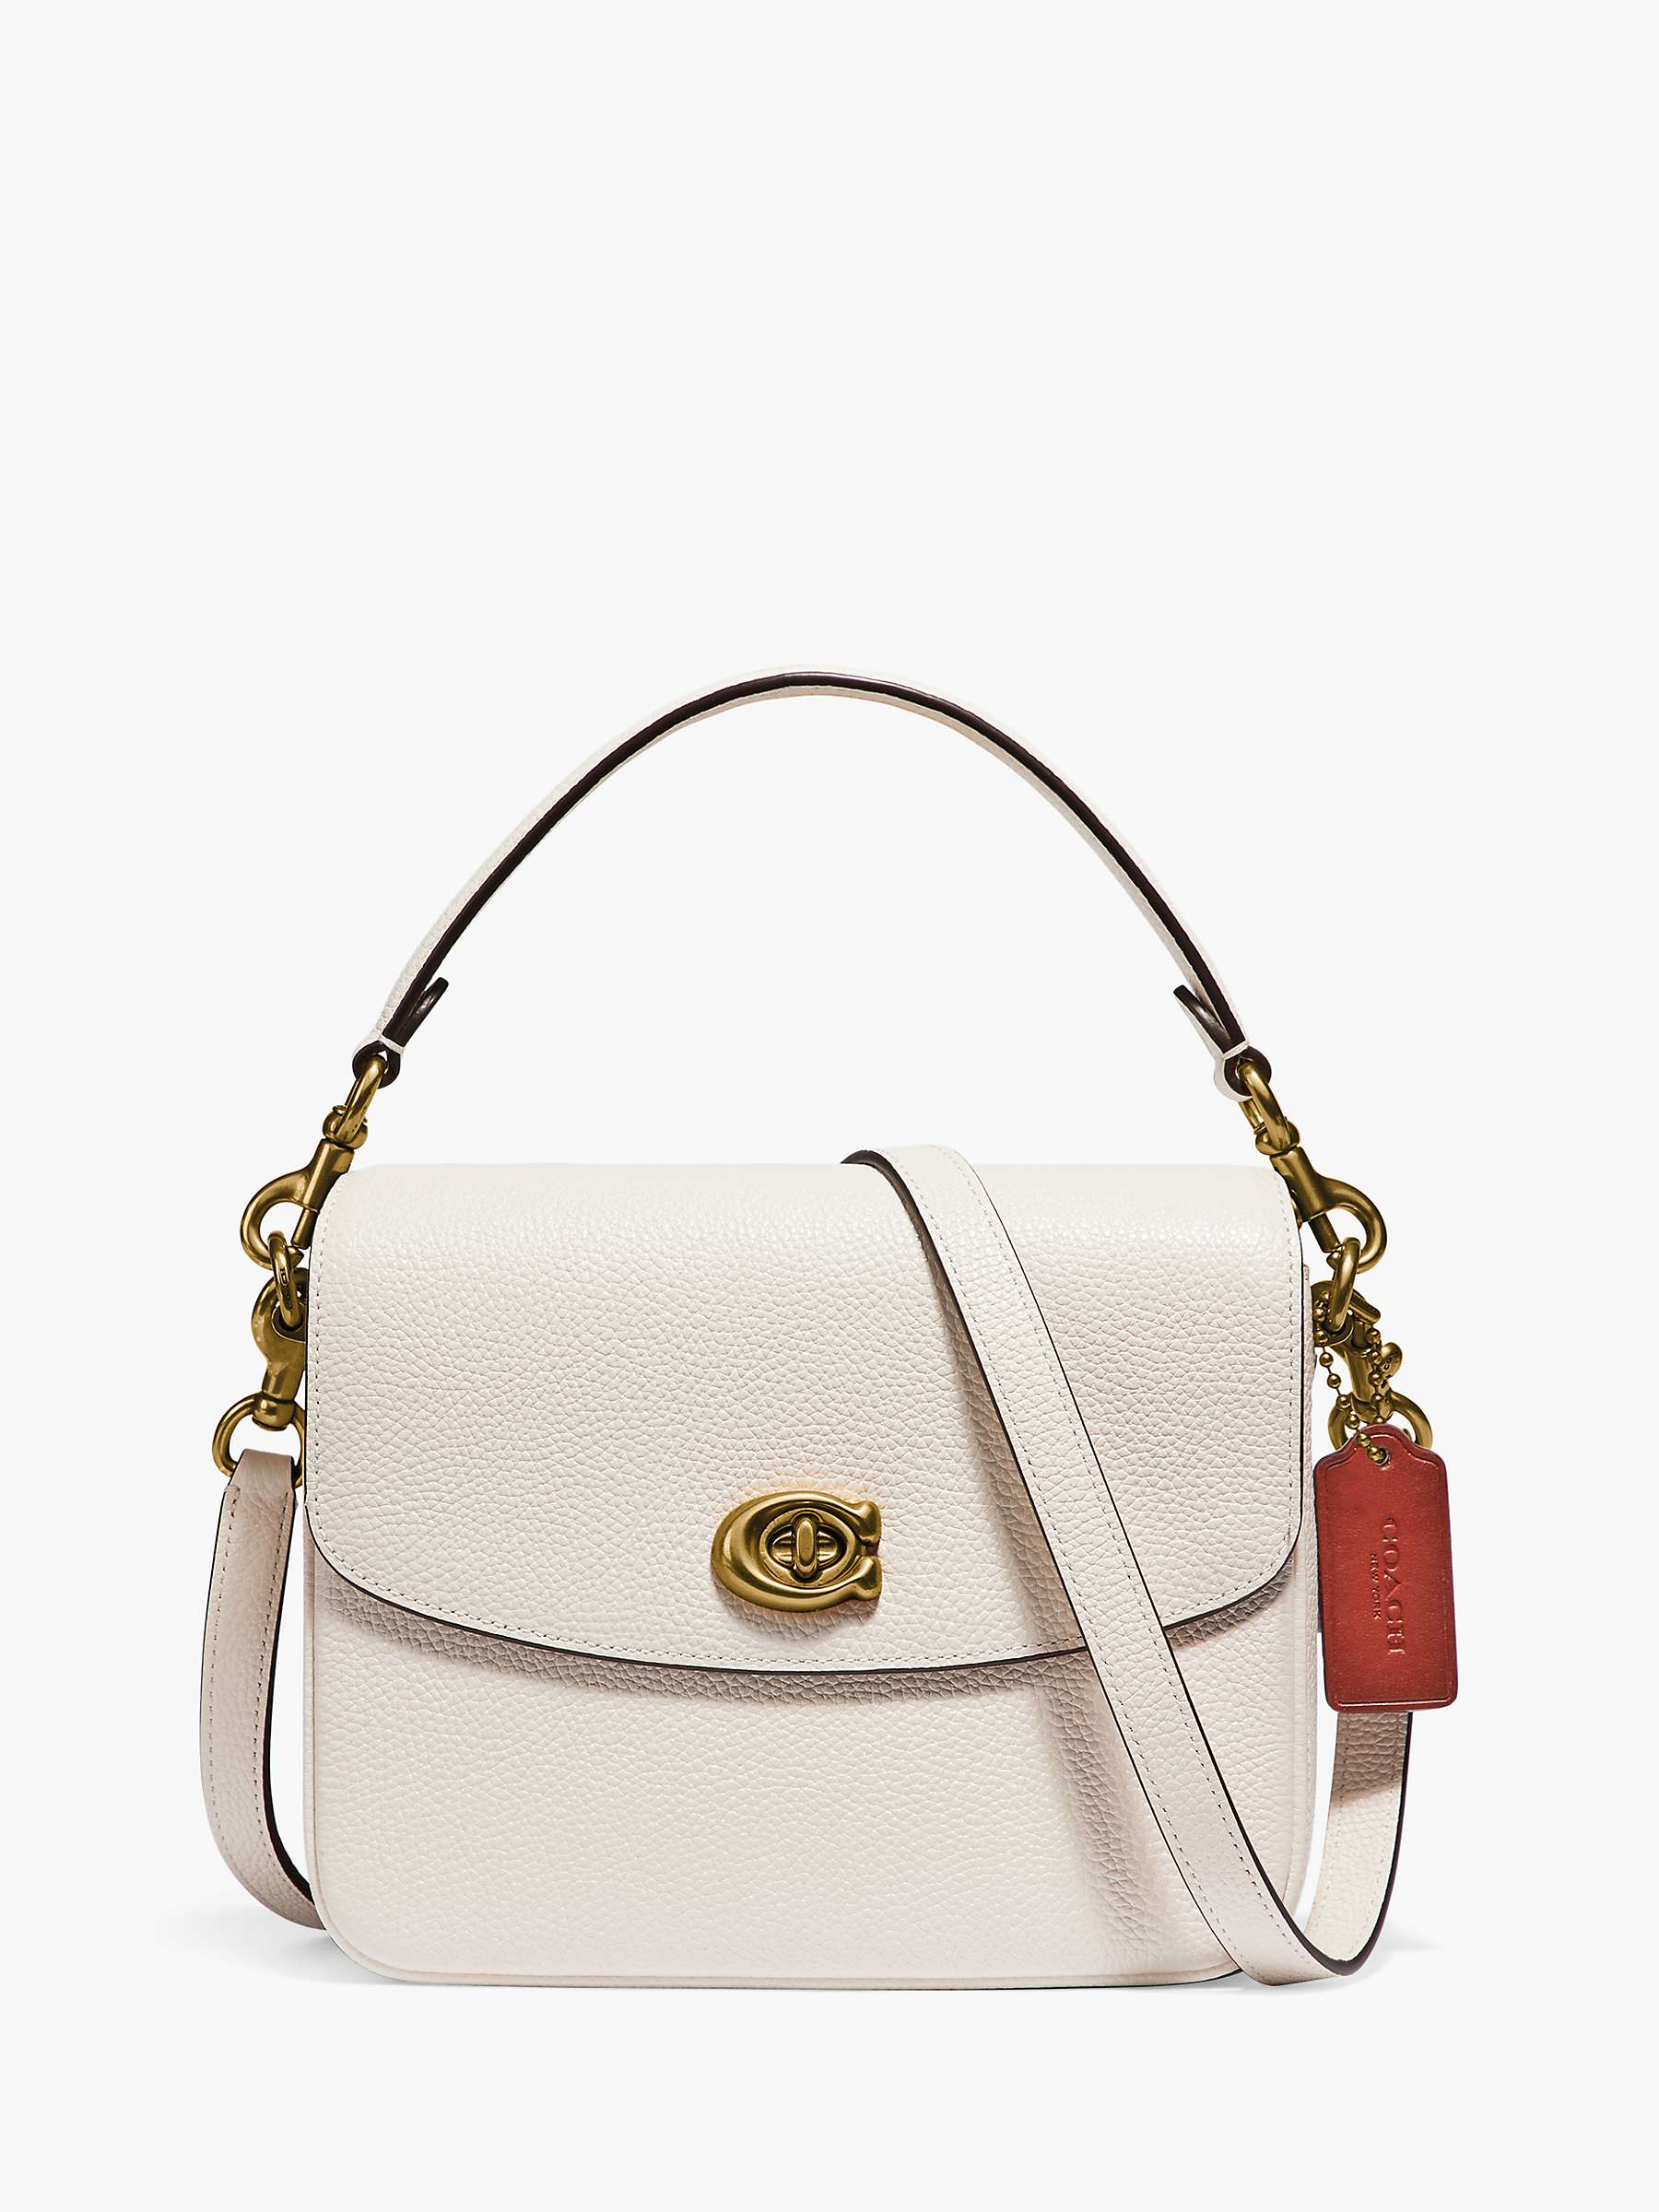 Coach Cassie 19 Leather Cross Body Bag, Chalk at John Lewis & Partners